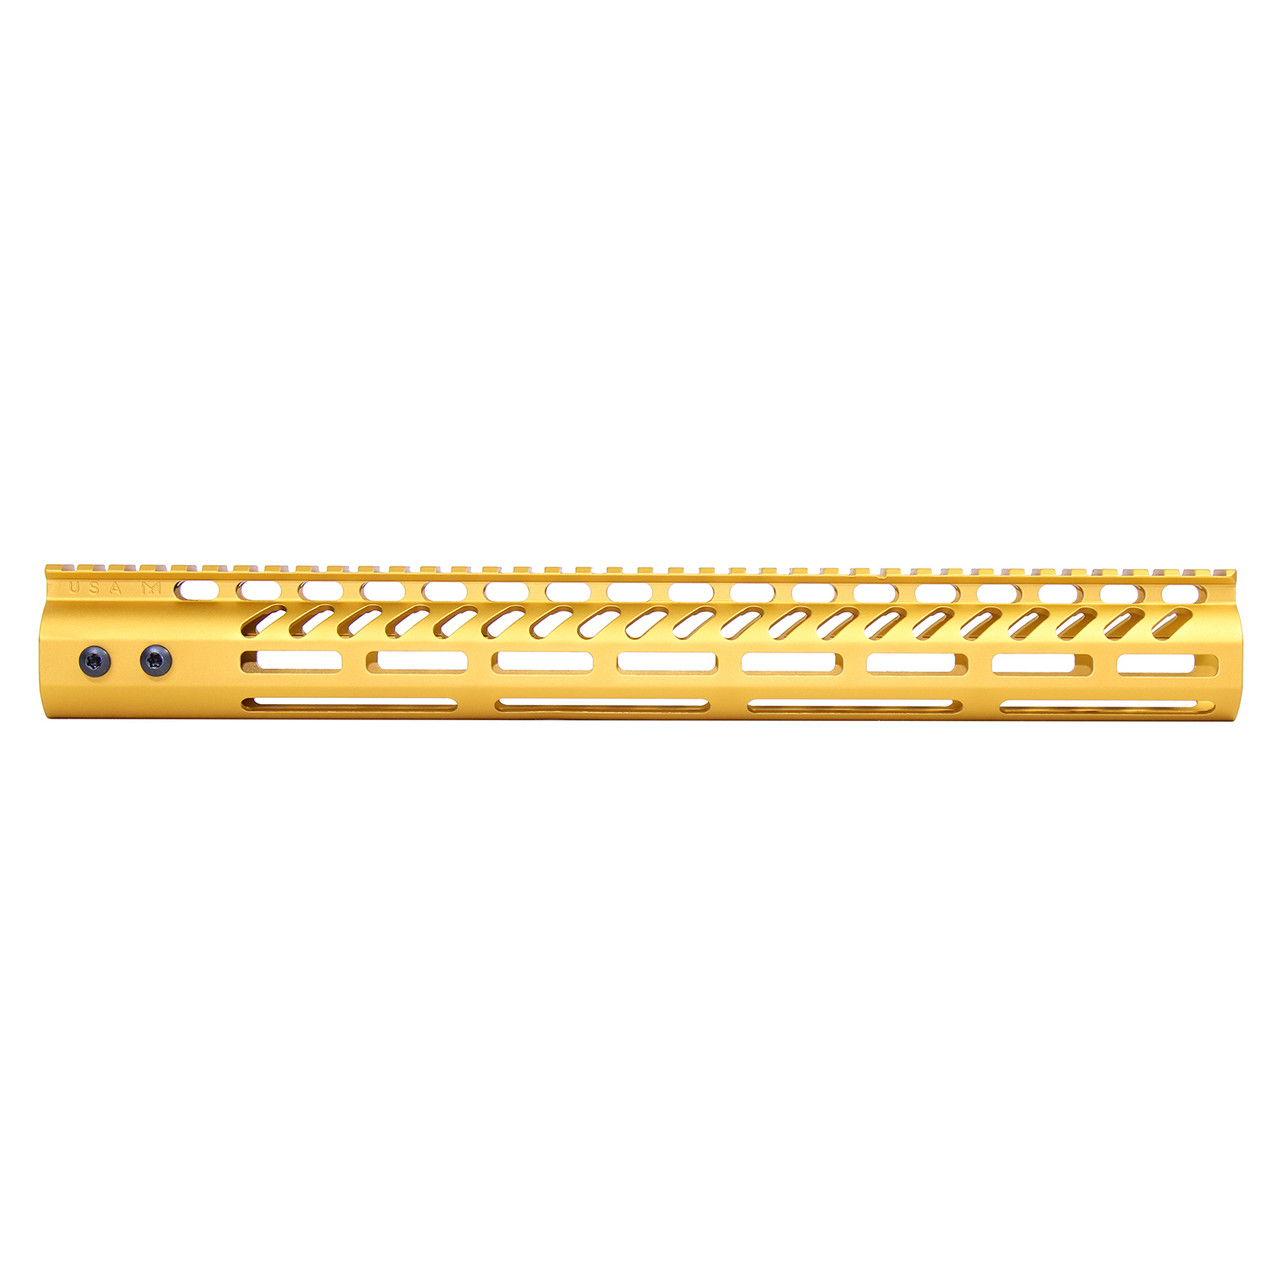 Guntec USA GT-15MLK-GOLD 15" Ultra Lightweight Thin M-LOK System Free Floating Handguard With Monolithic Top Rail (Anodized Gold)